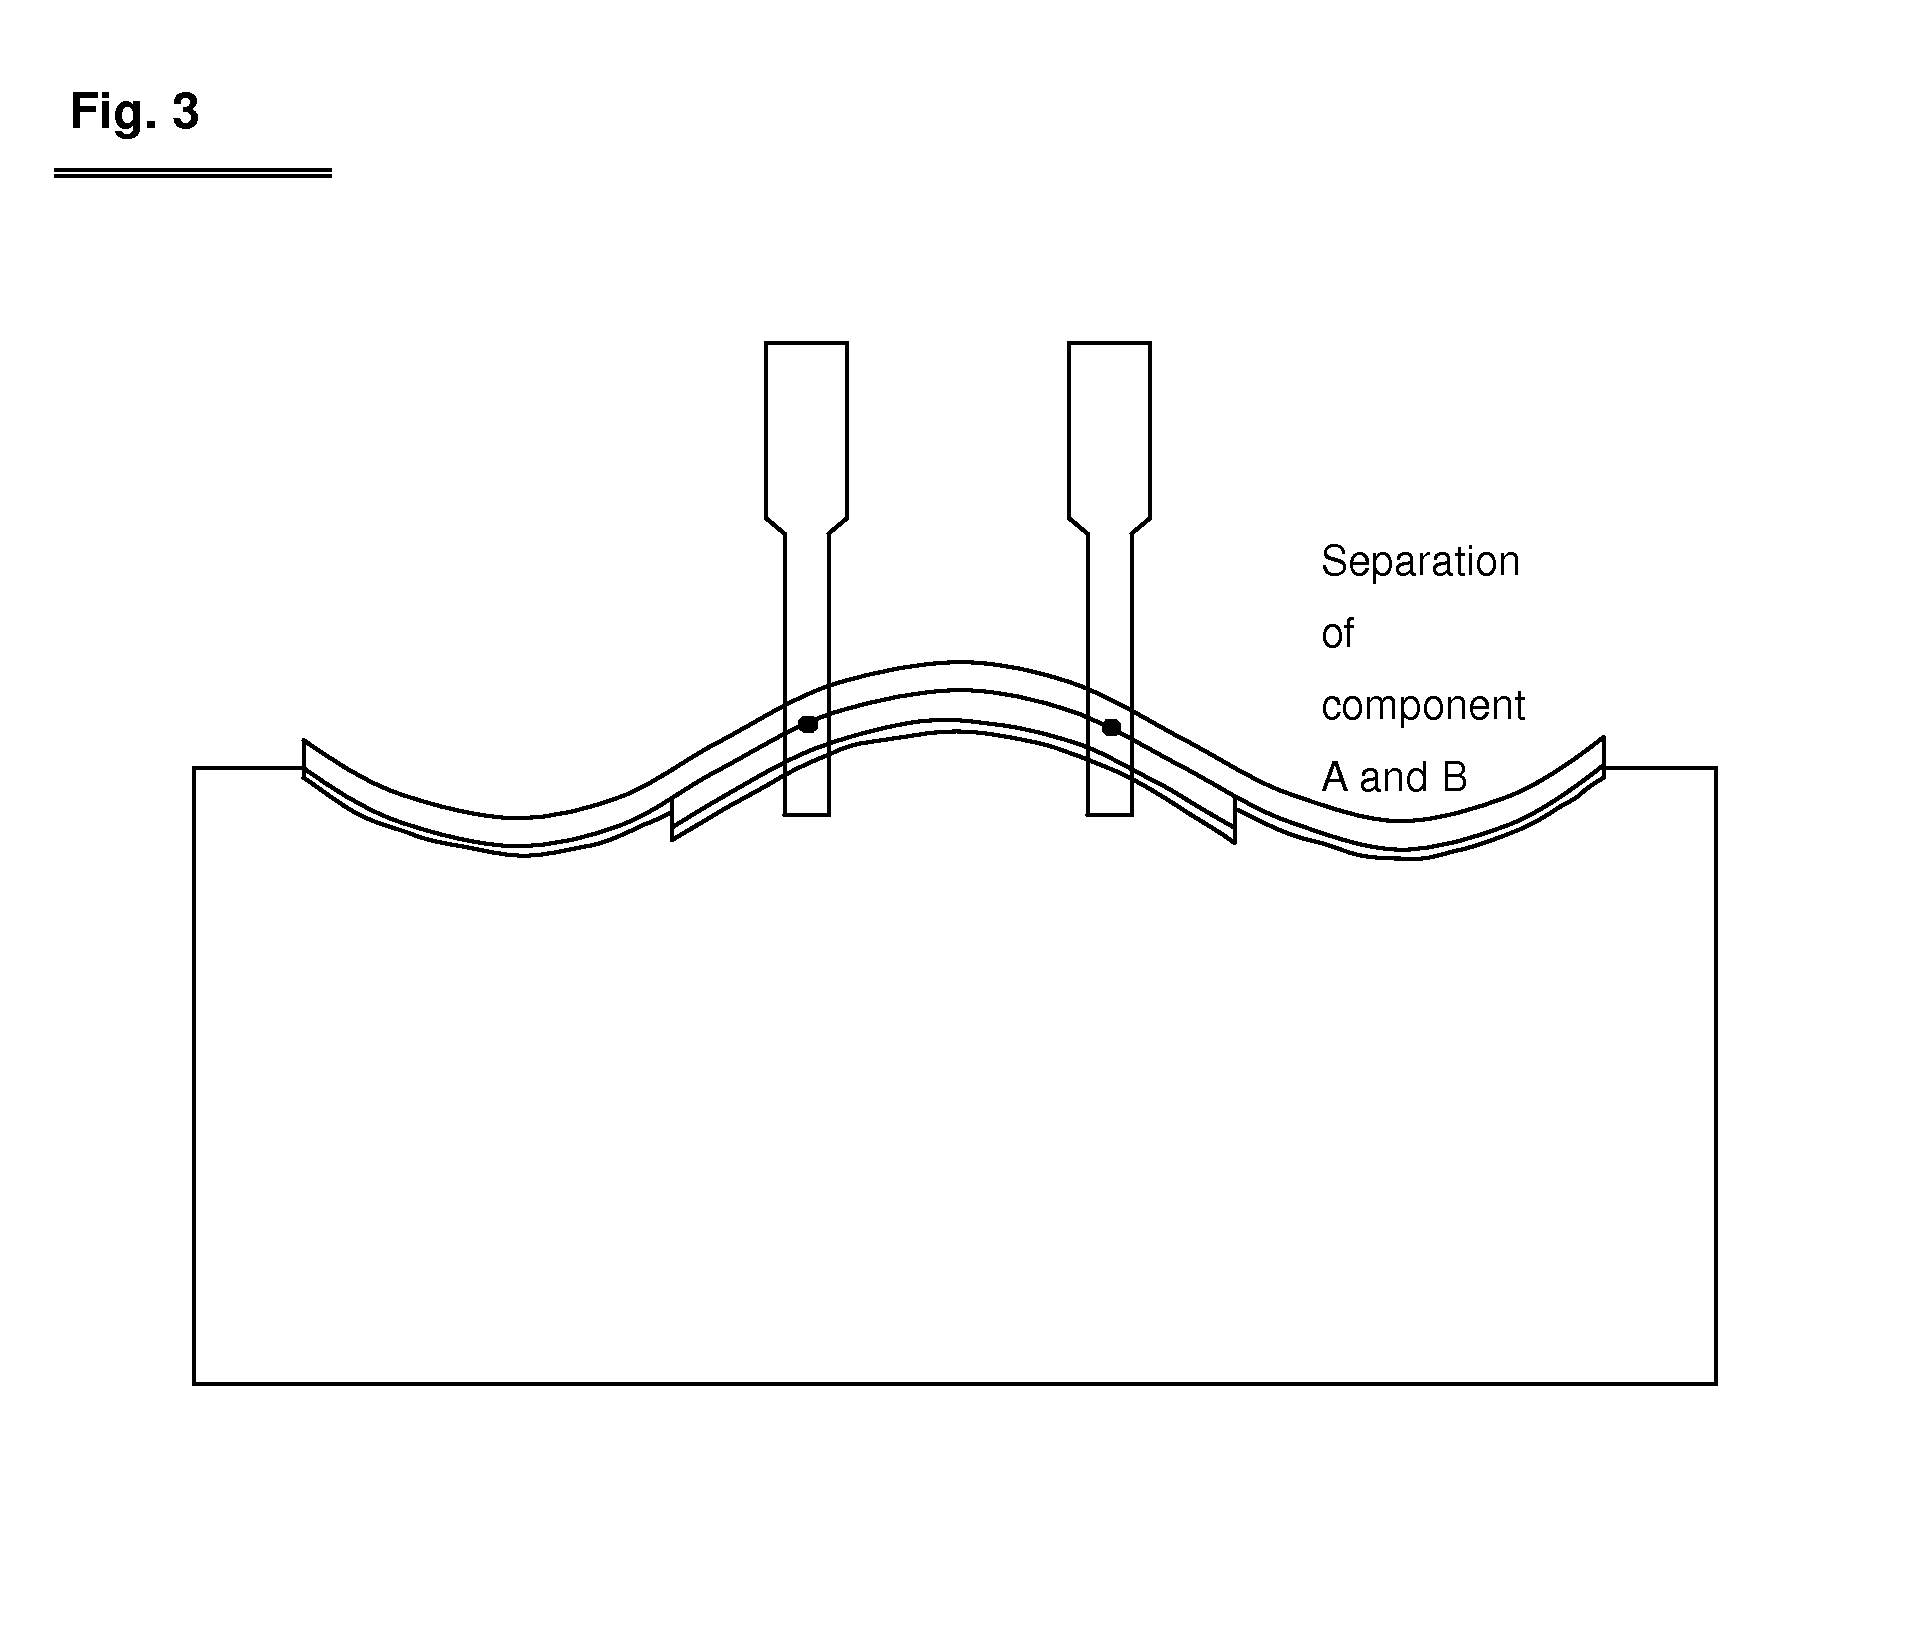 Process for producing components having regions of differing ductility